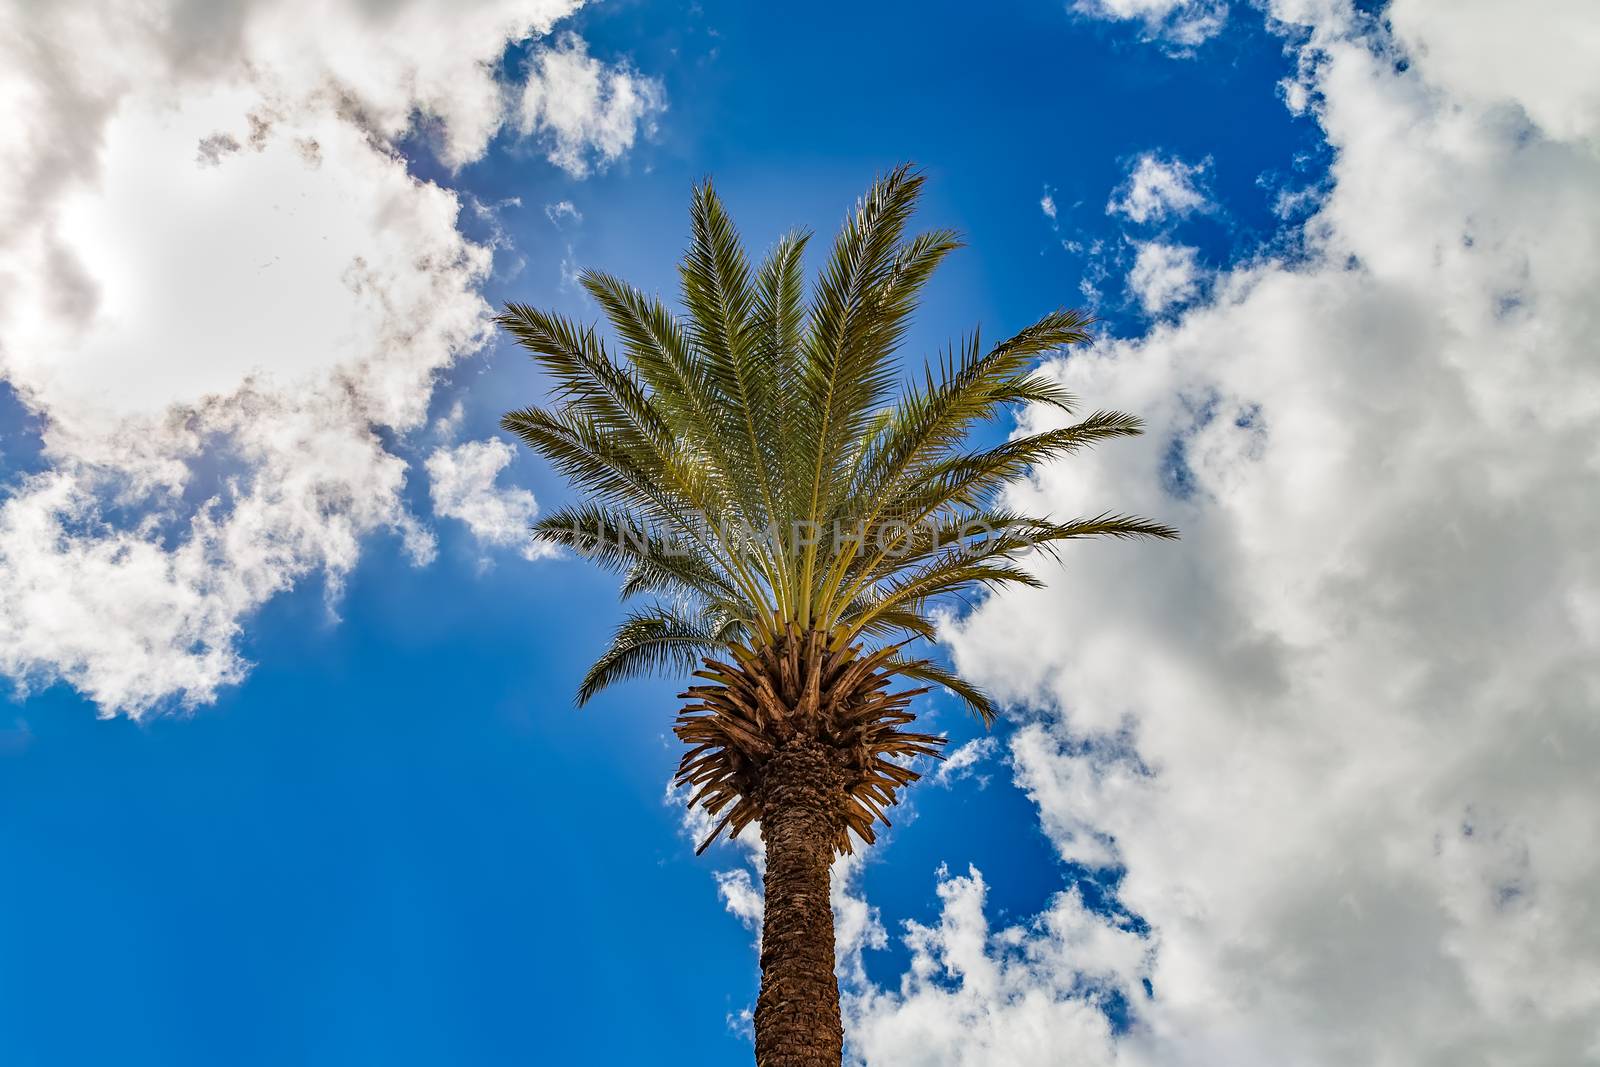 Palm tree with blue sky and clouds as a background by DamantisZ